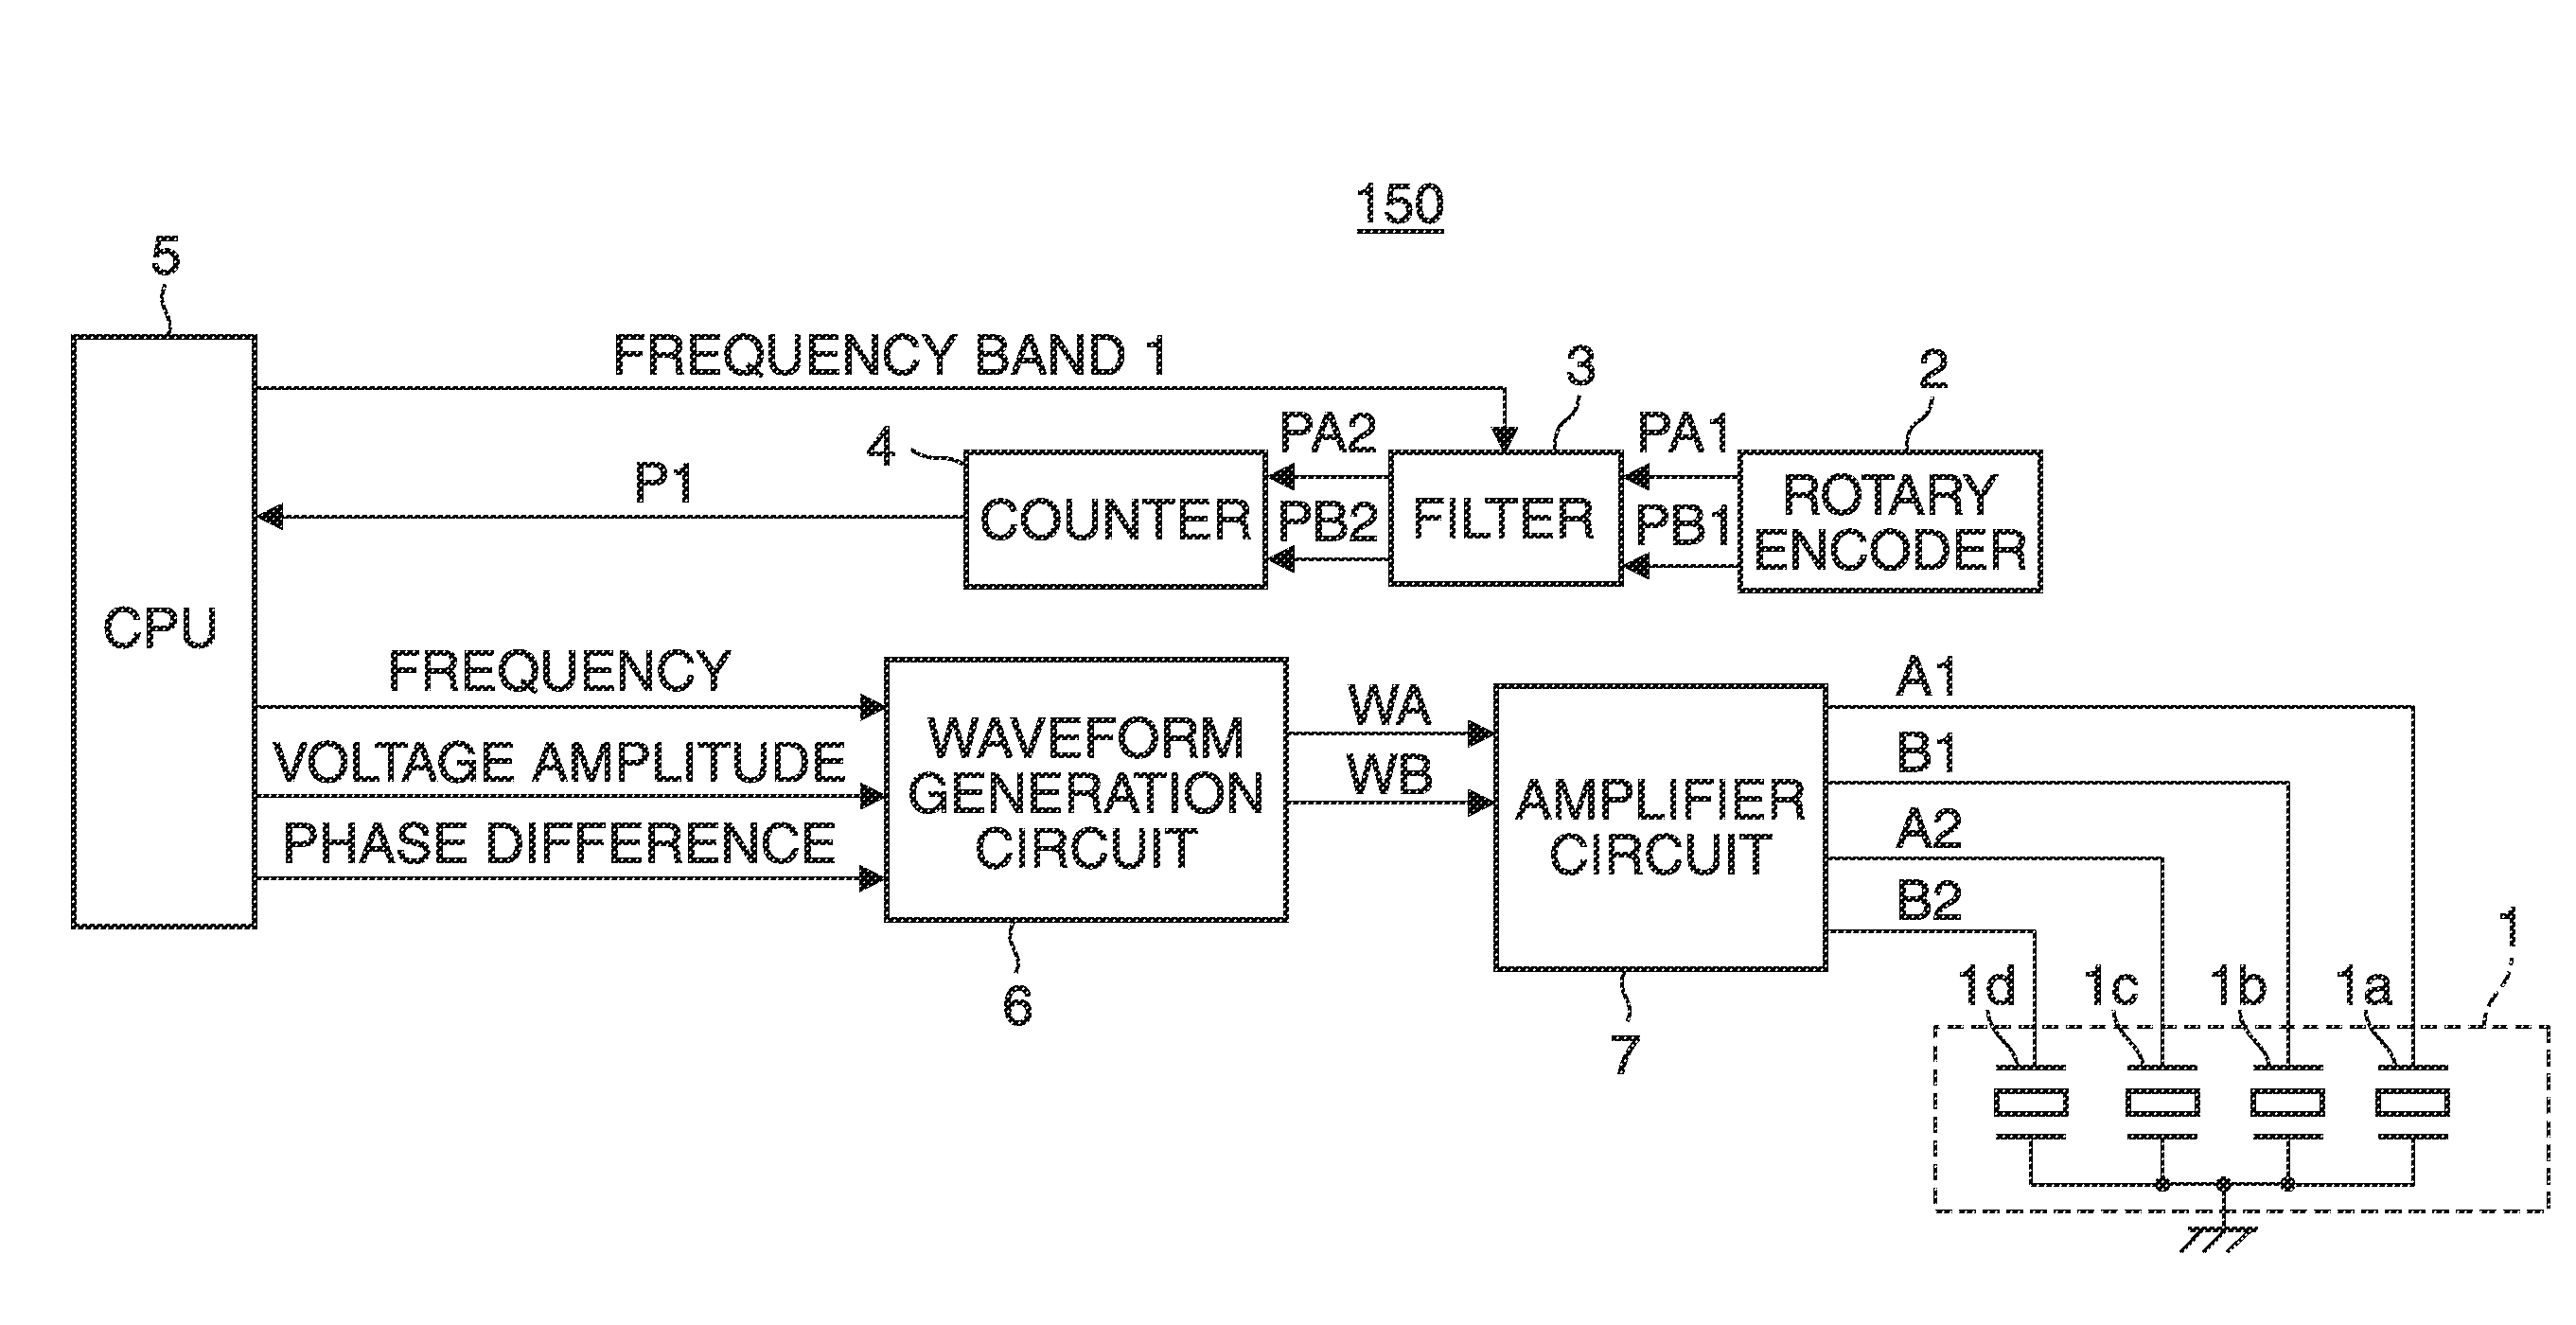 Vibration type actuator apparatus increased in position detection accuracy, controller, and medical system